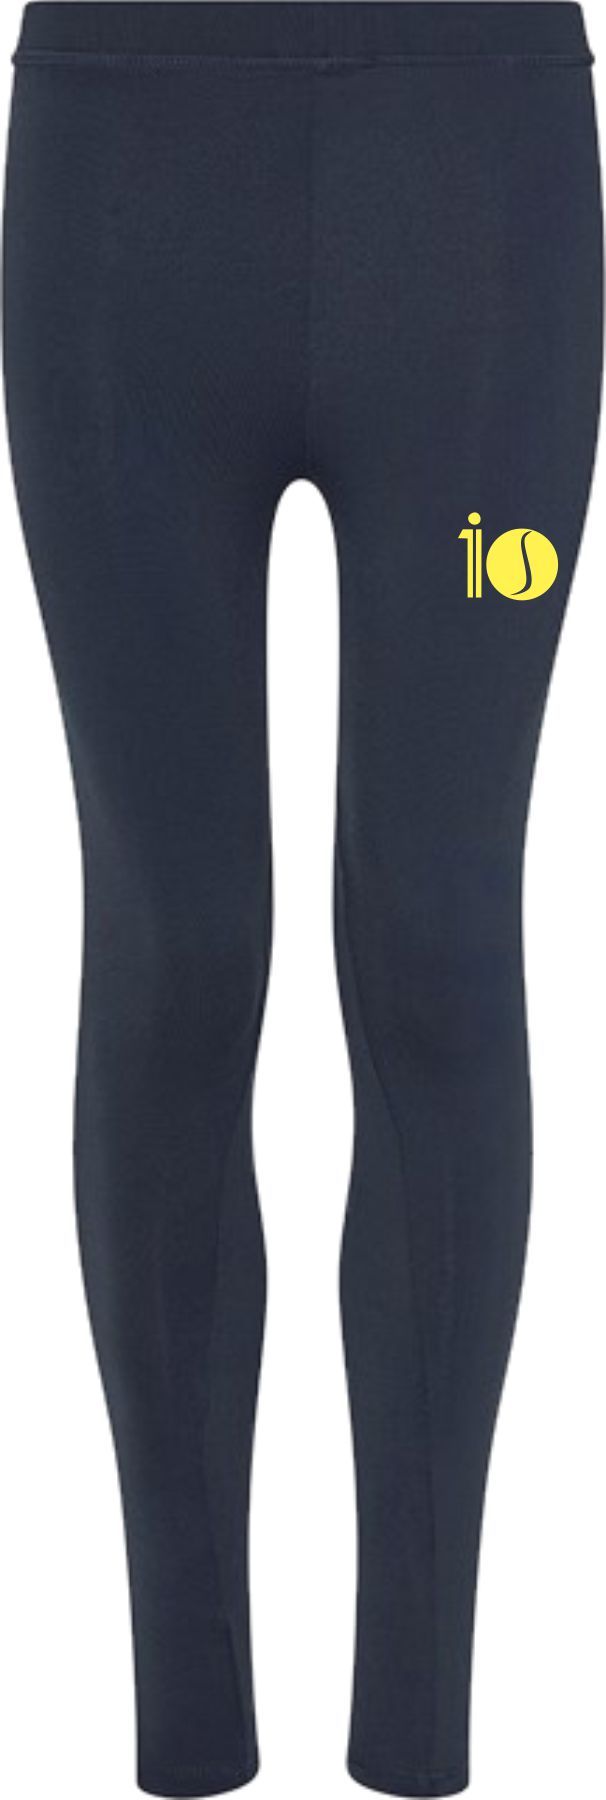 10is Academy Cool Atheletic Pants (Ladies)